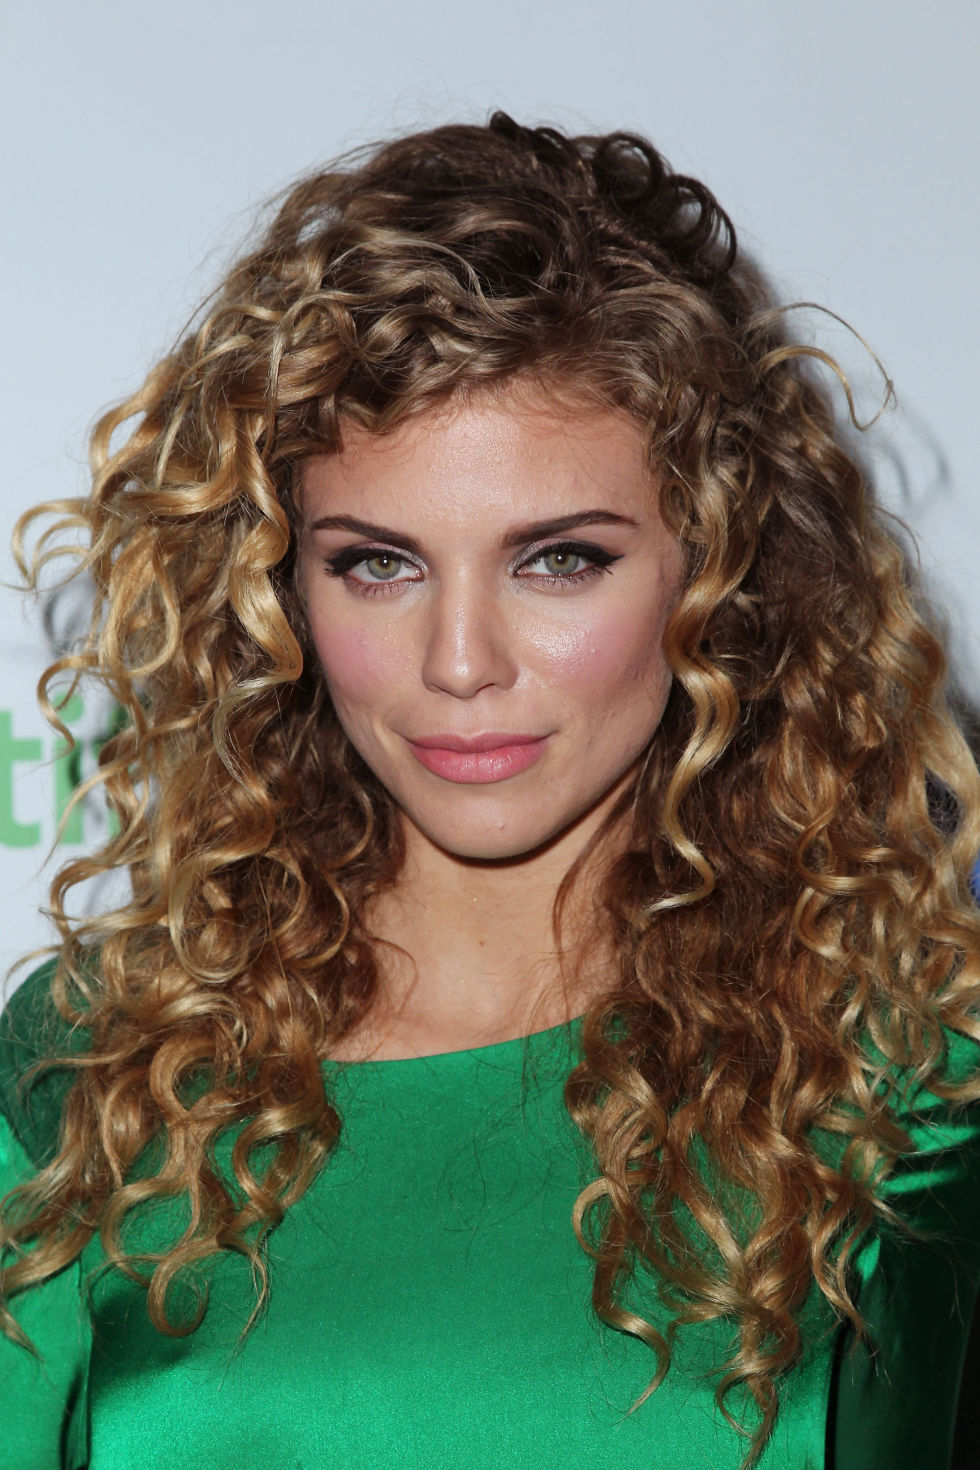 Get this curly middle sized hairstyle